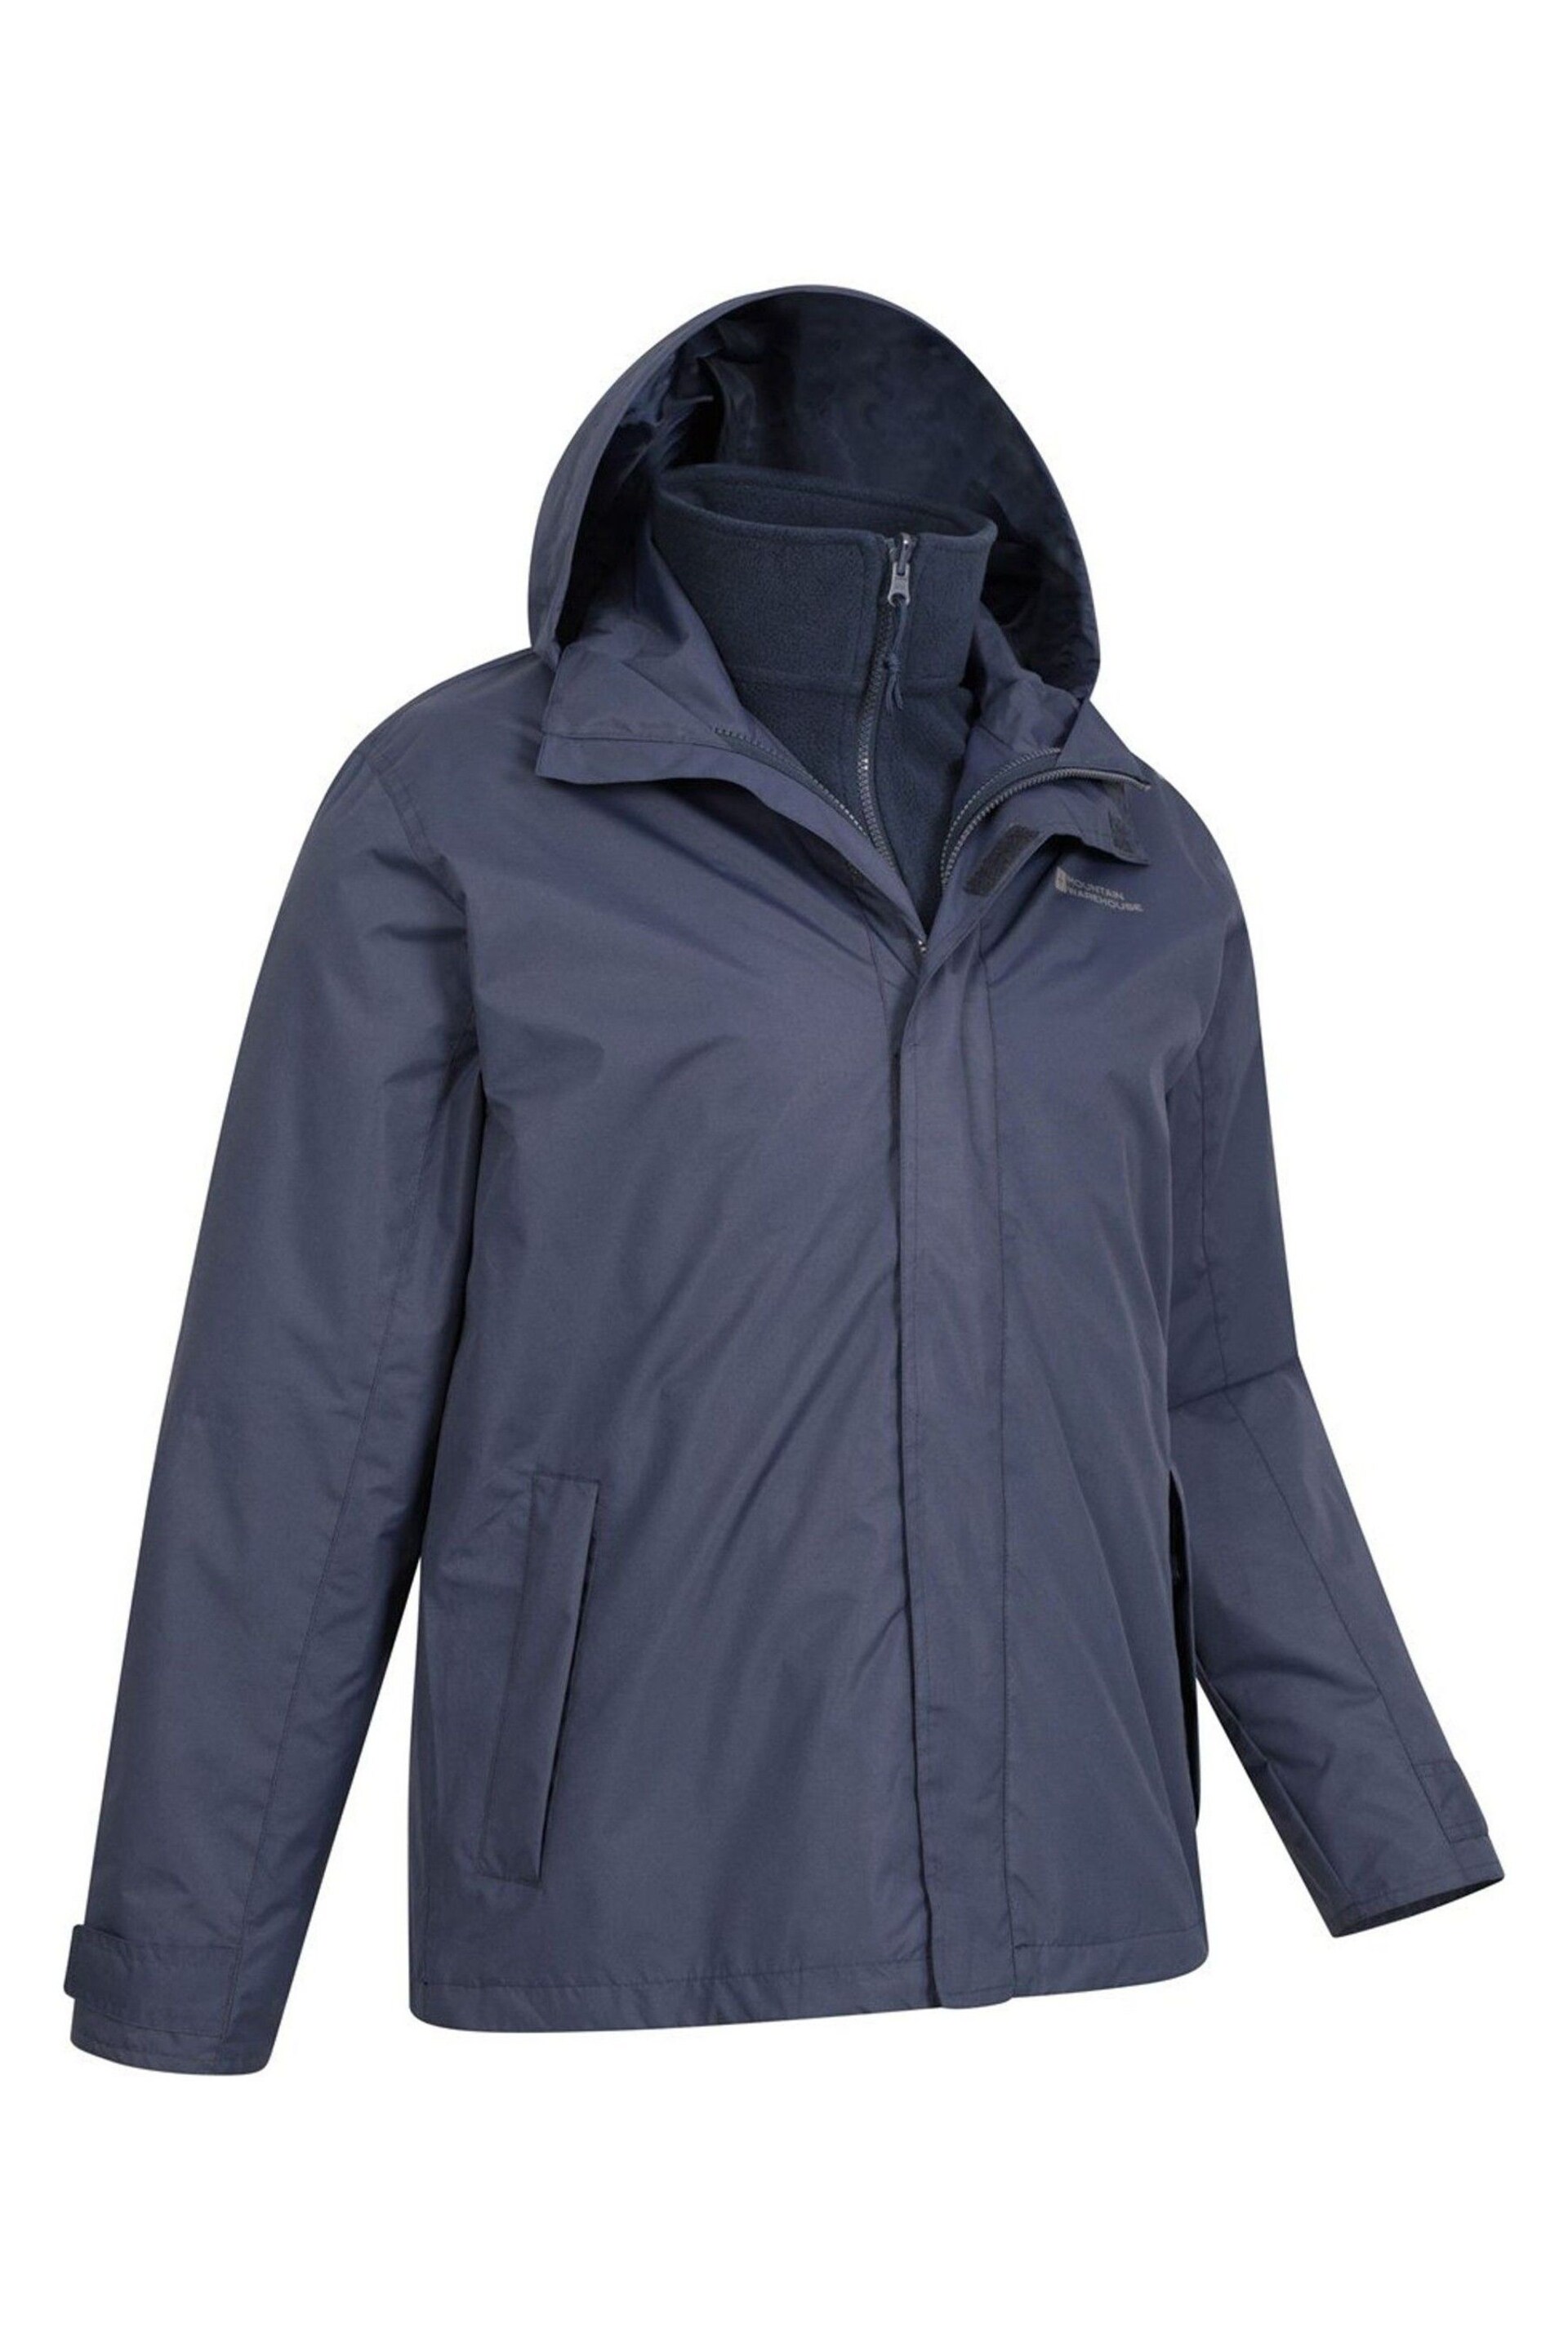 Mountain Warehouse Blue Fell Mens 3 in 1 Water Resistant Jacket - Image 3 of 3